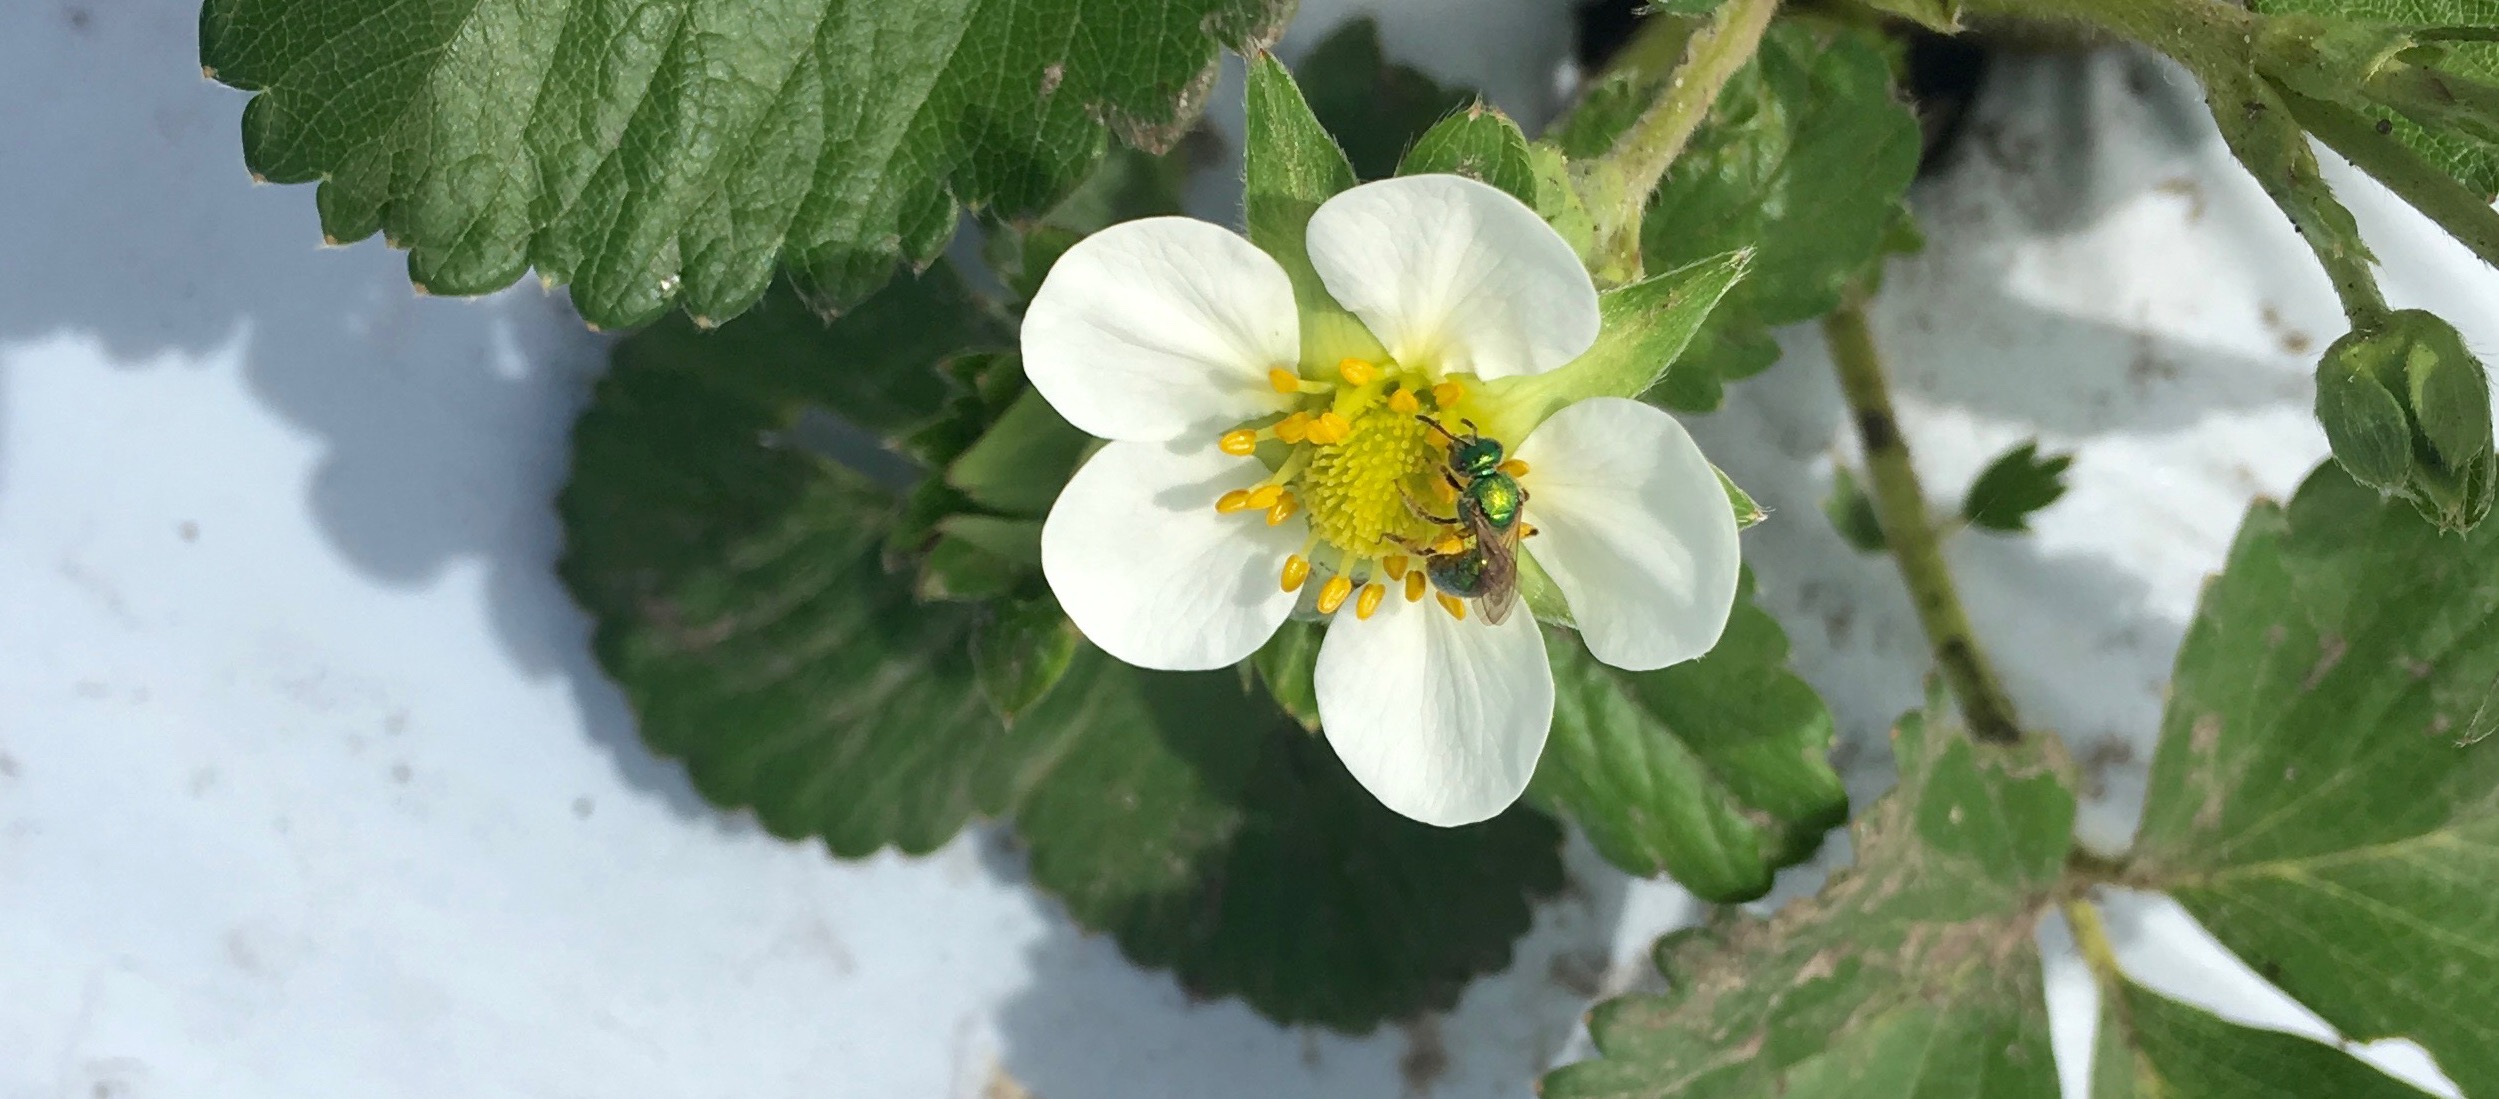 image of syrphid fly on a strawberry flower